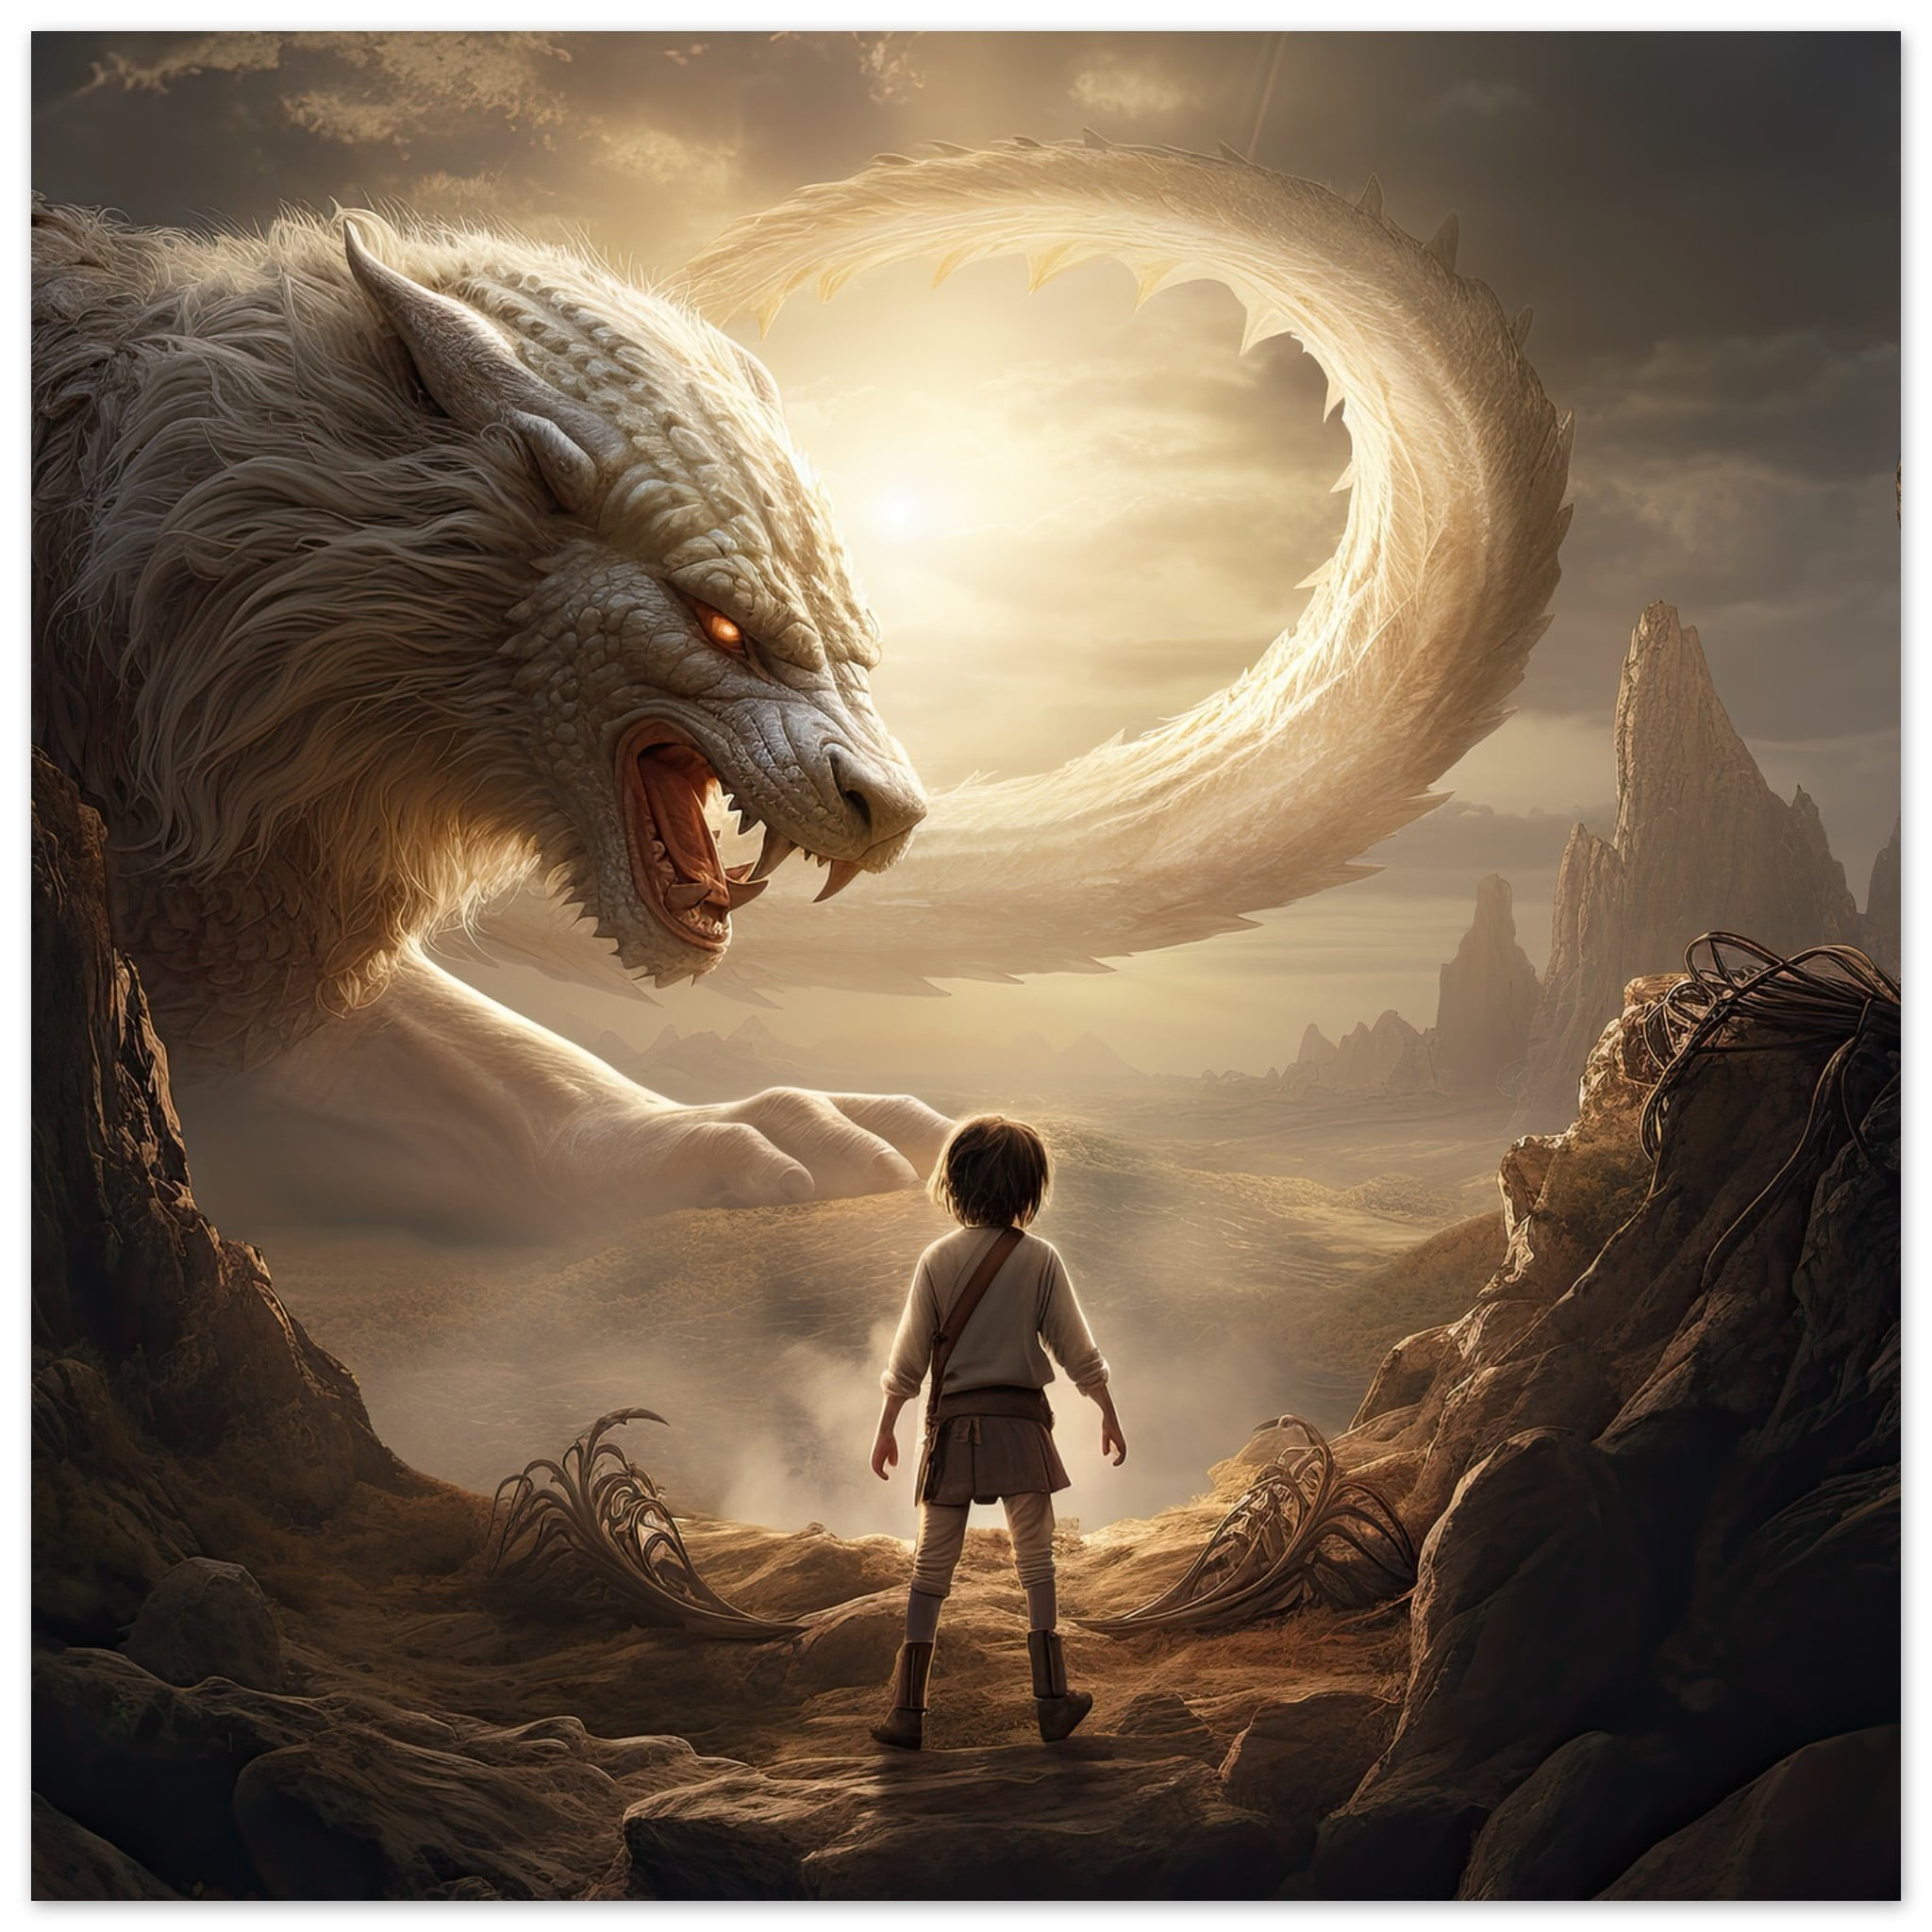 The Boy and the Chimera Art Poster – 25×25 cm / 10×10″